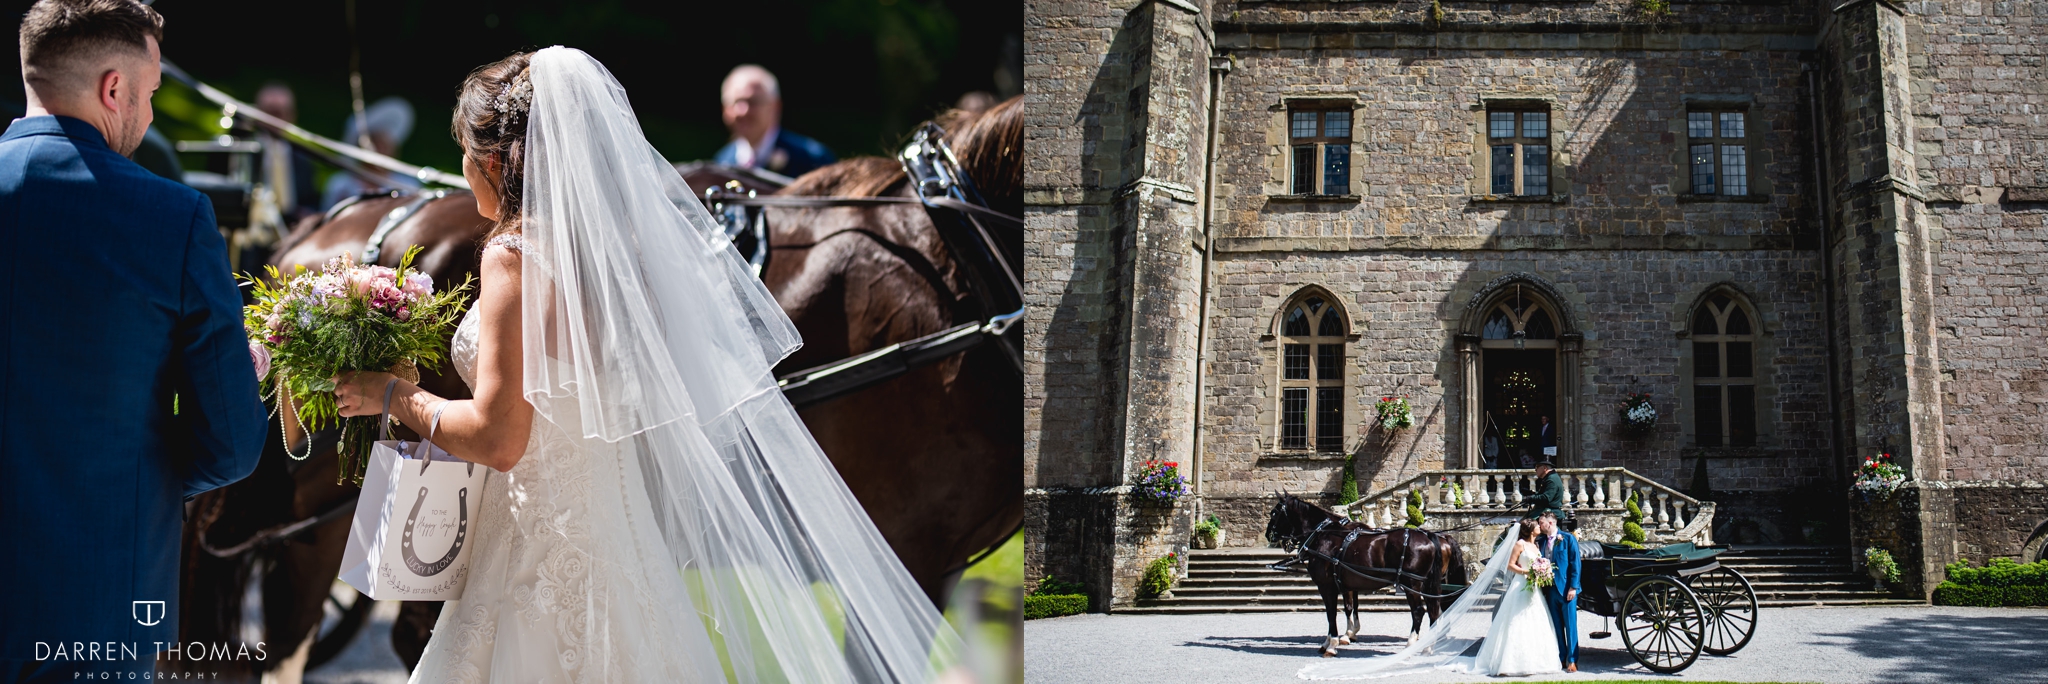 Clearwell-Castle-Wedding-Photographer-wedding-photography-south-wales